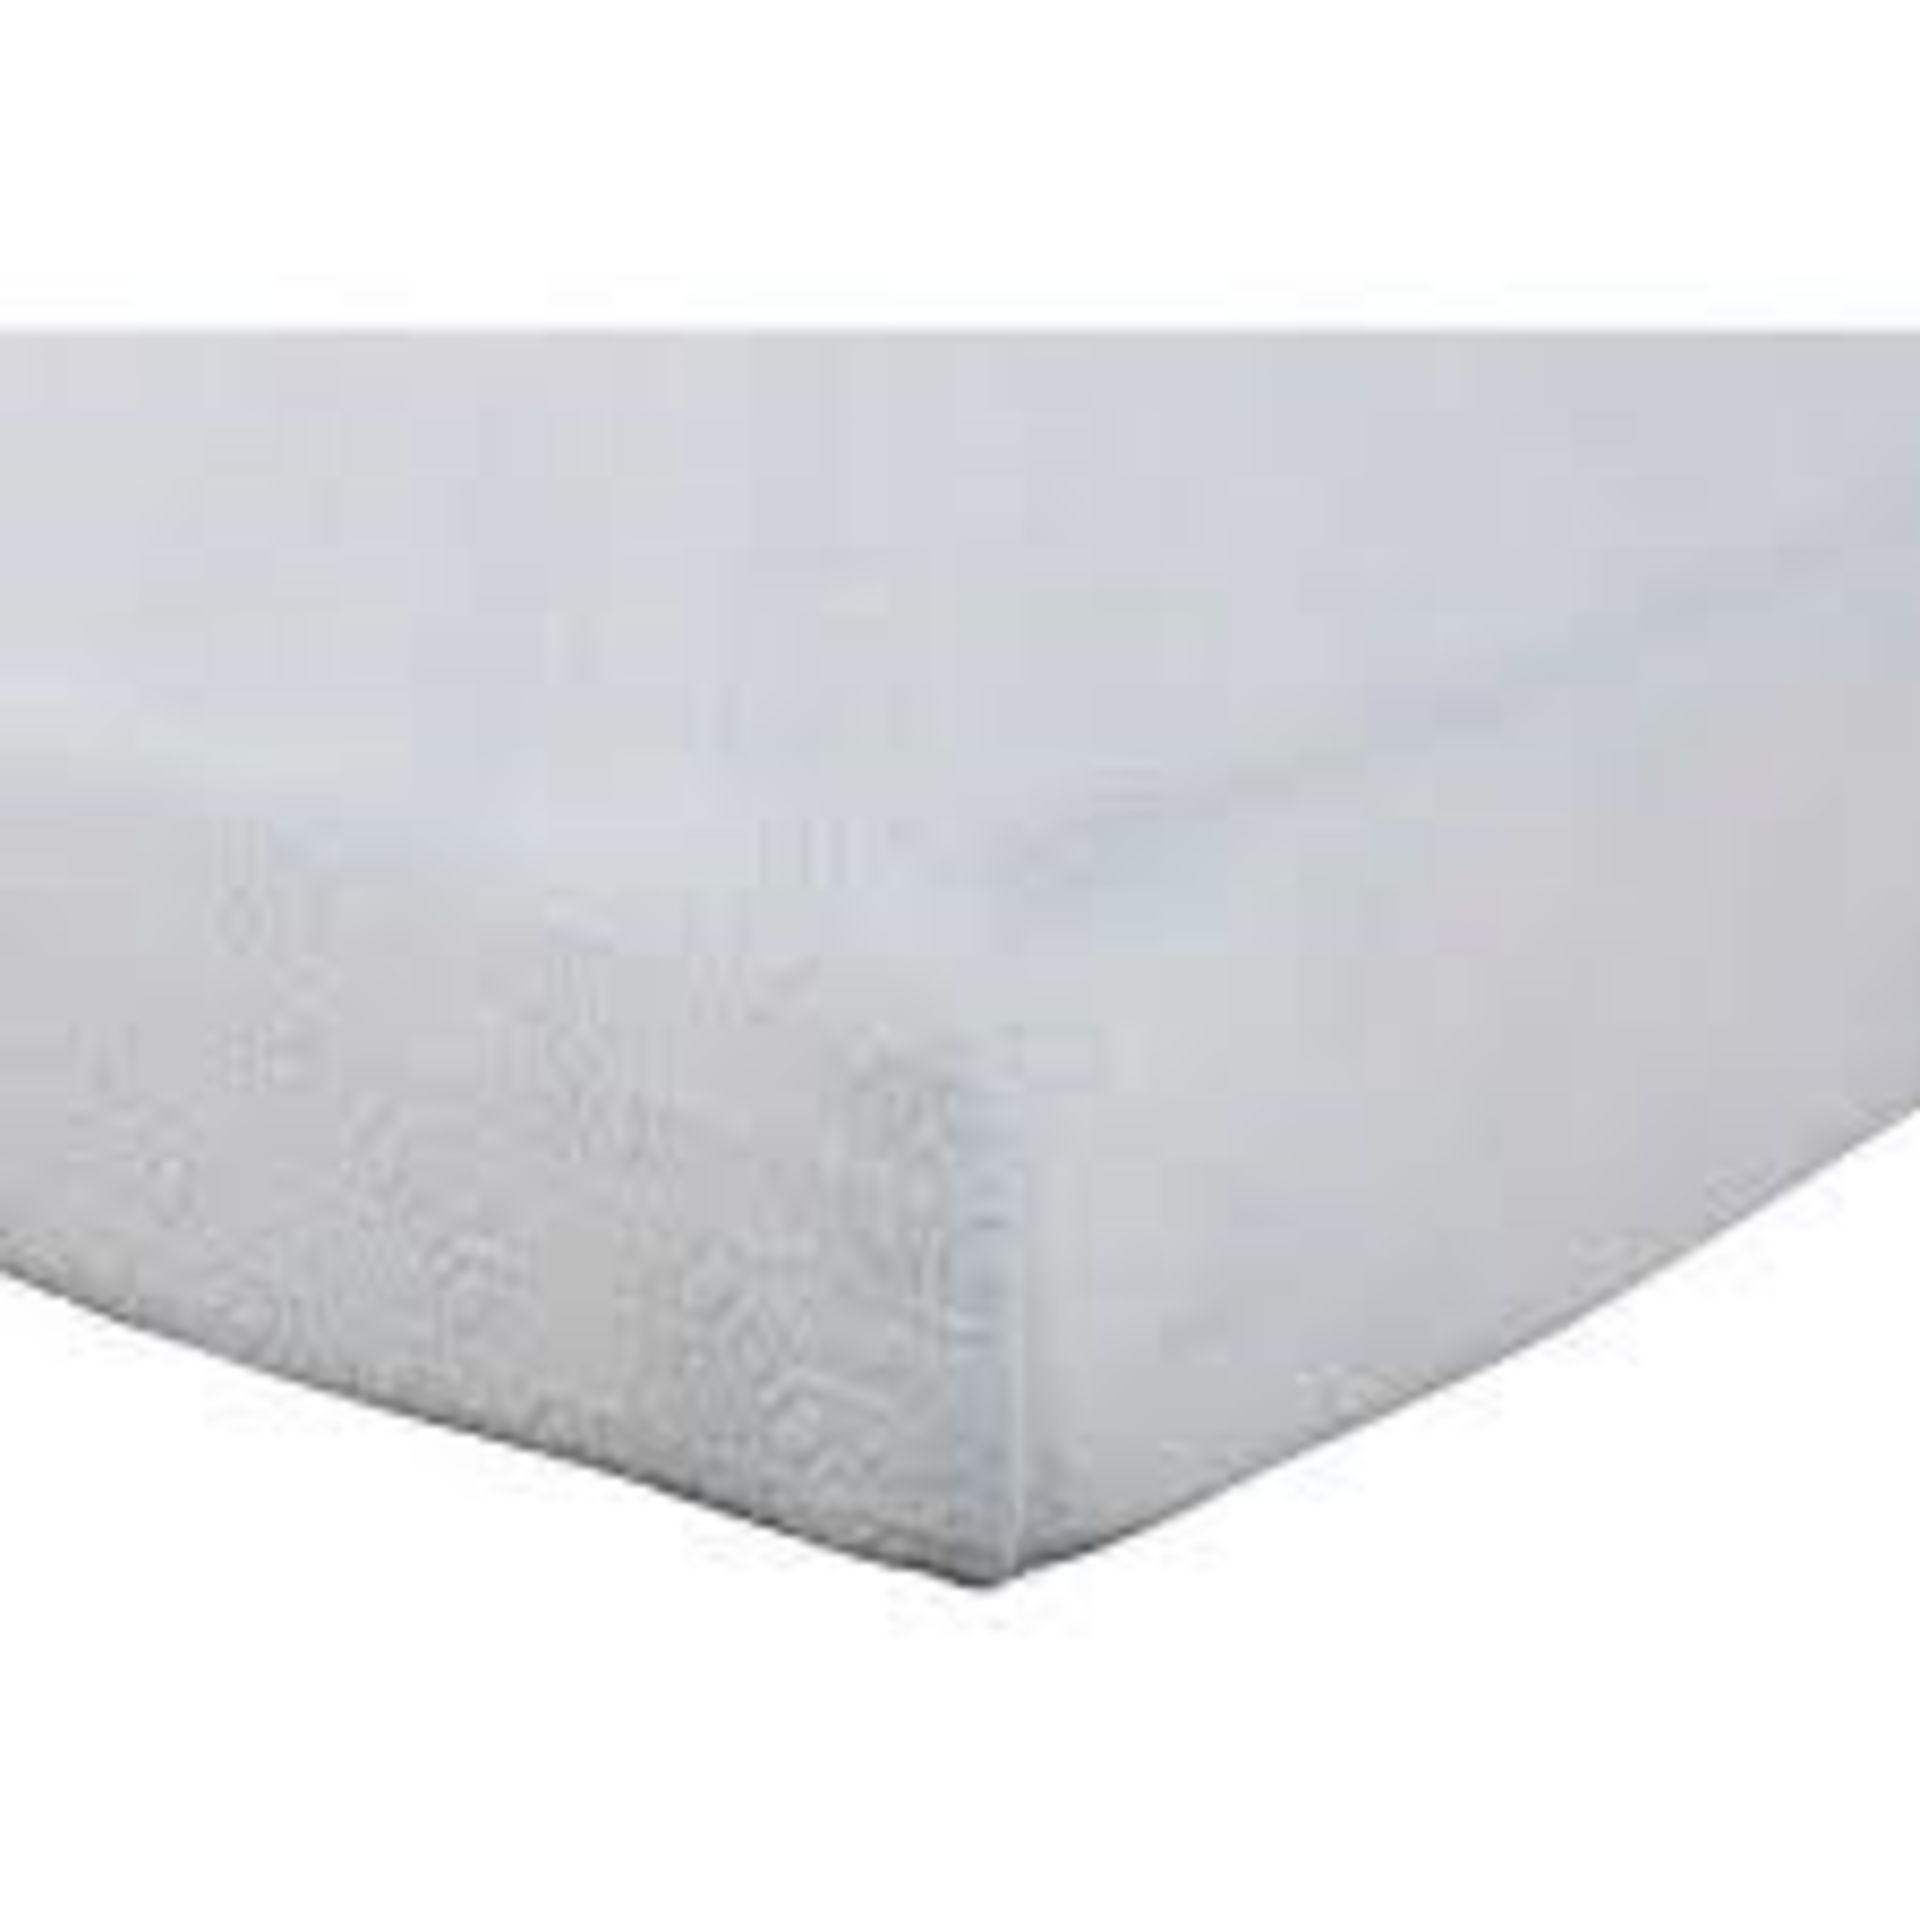 Bagged Ready Rolled Designer Mattress RRP £225 (17035) (Public Viewing and Appraisals Available)